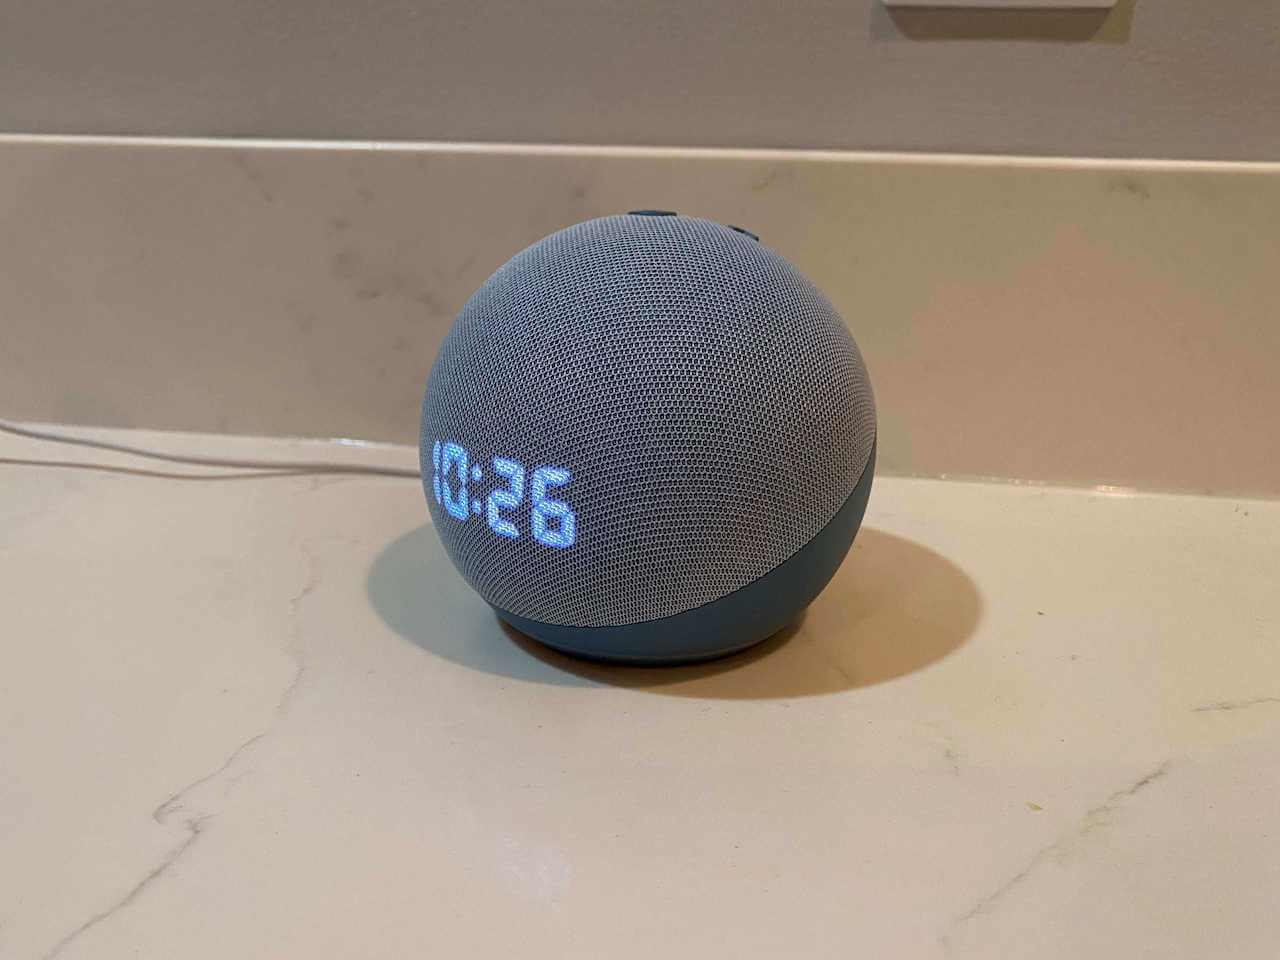 The 4th-generation Echo Dot with a clock display